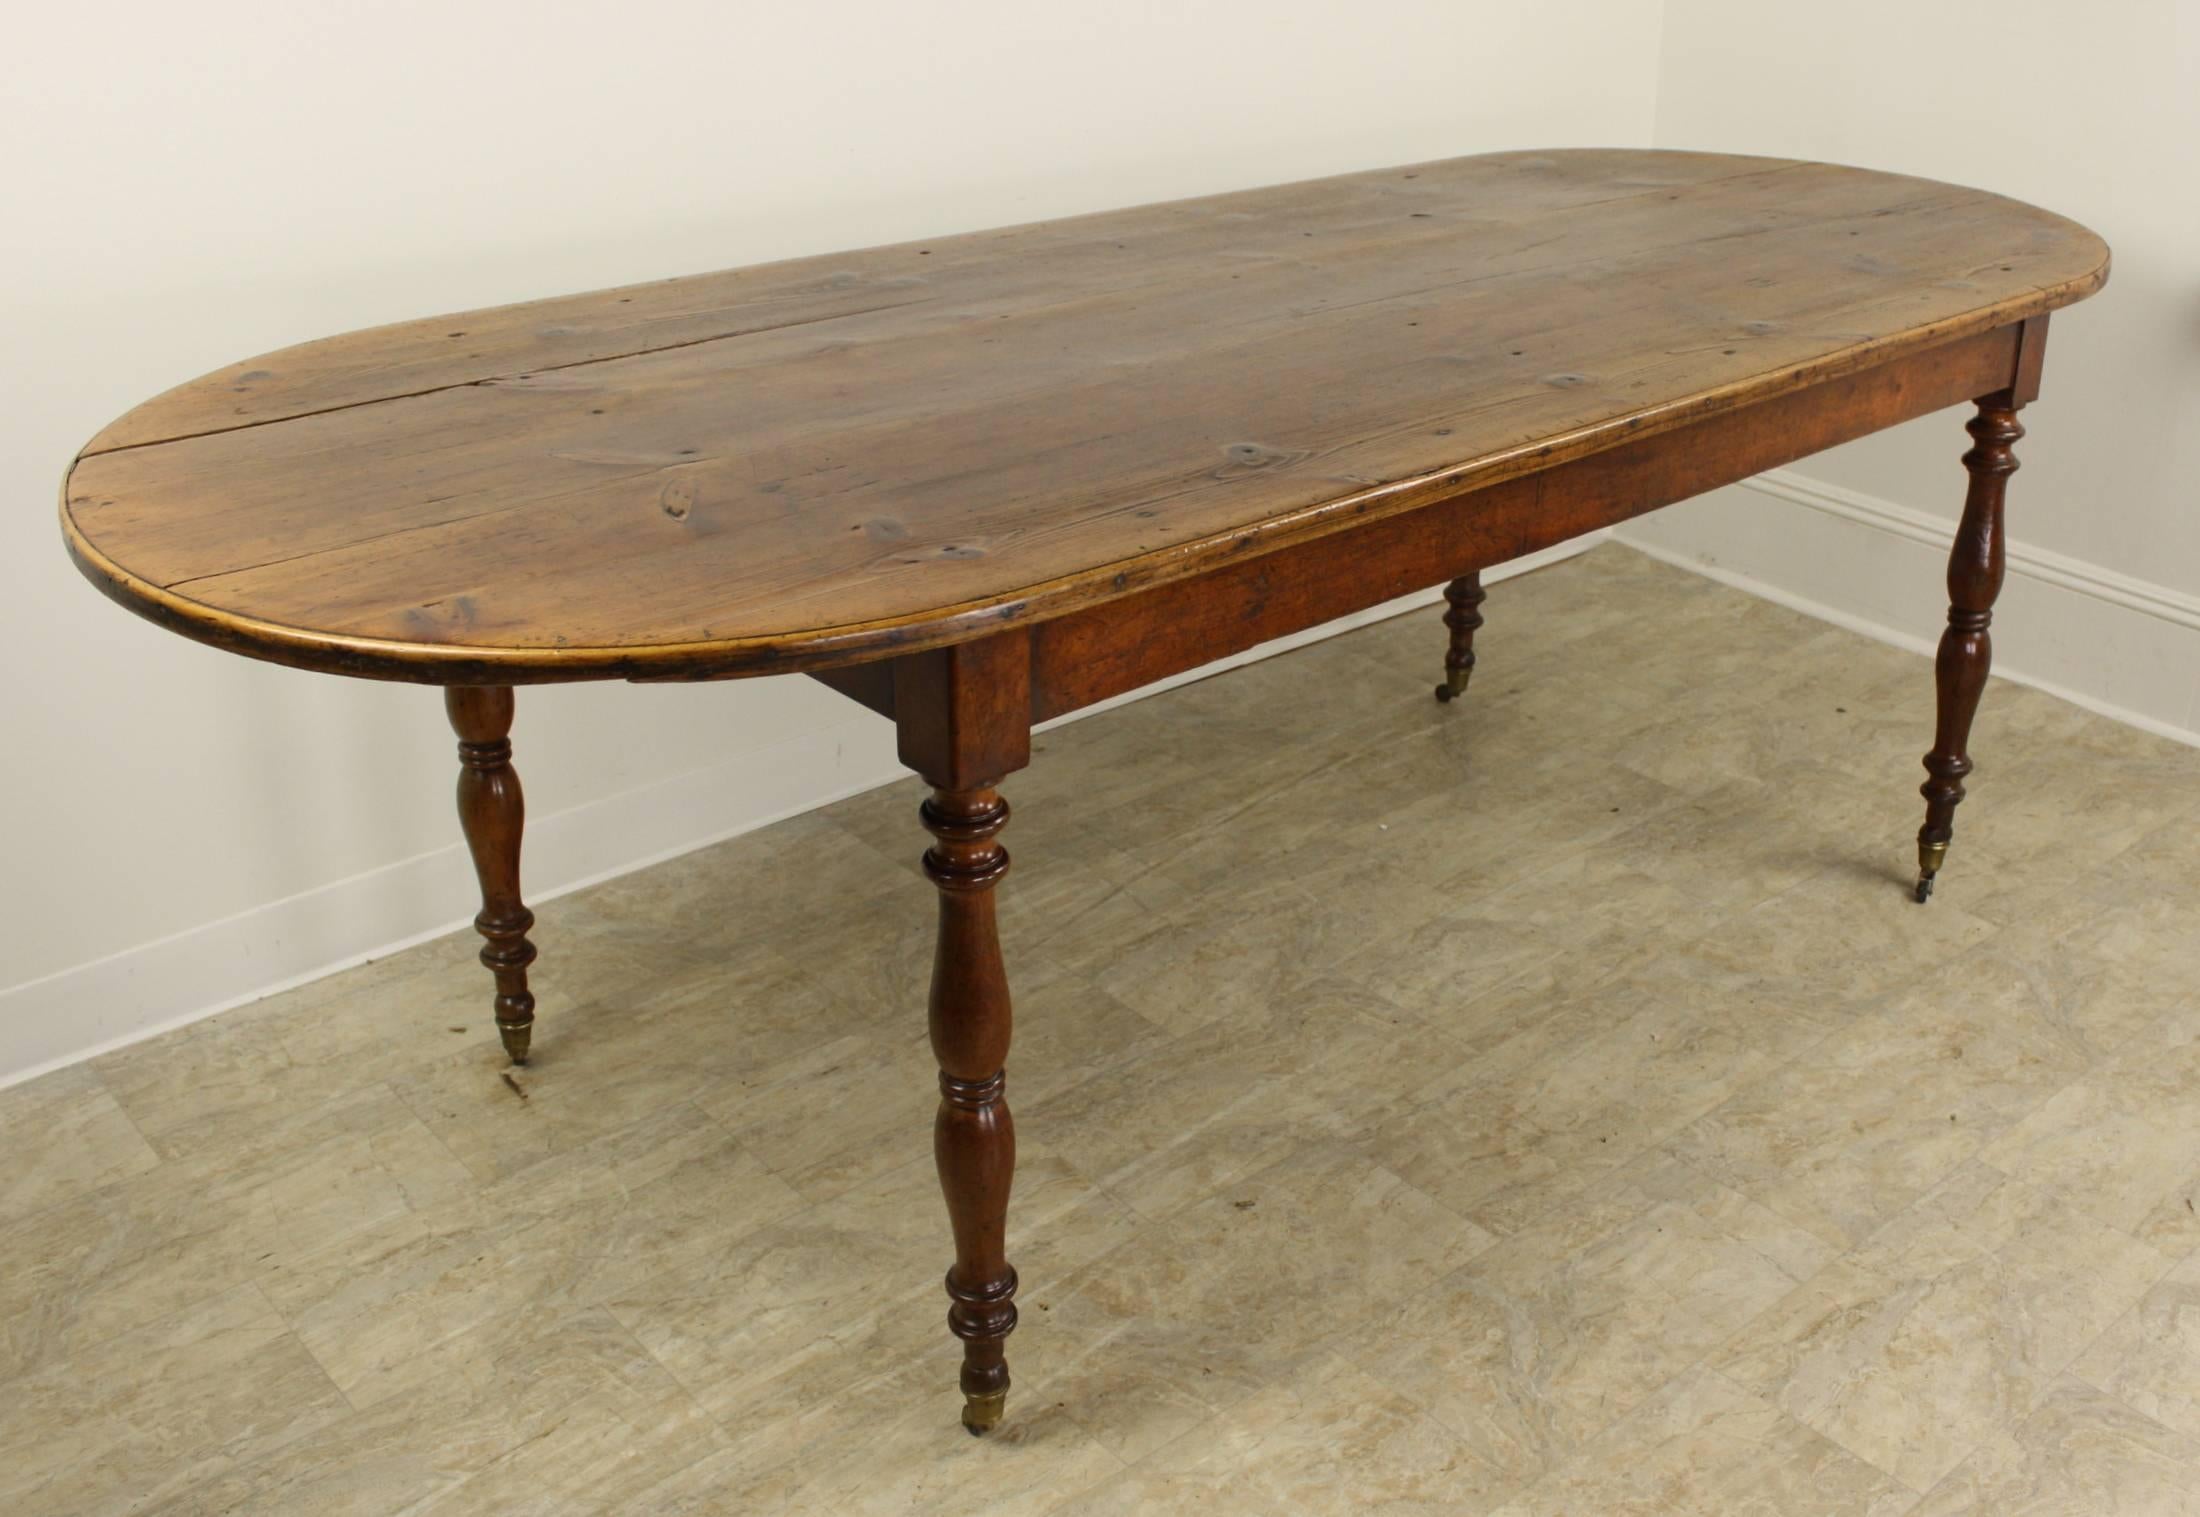 This is a good size, allowing seating for 12, with medium size chairs, this is a great dining table. Very pretty top as the color is a warm, cherry-like tone, very compatible with the rich cherry base. Attractive hand-turned legs end in original